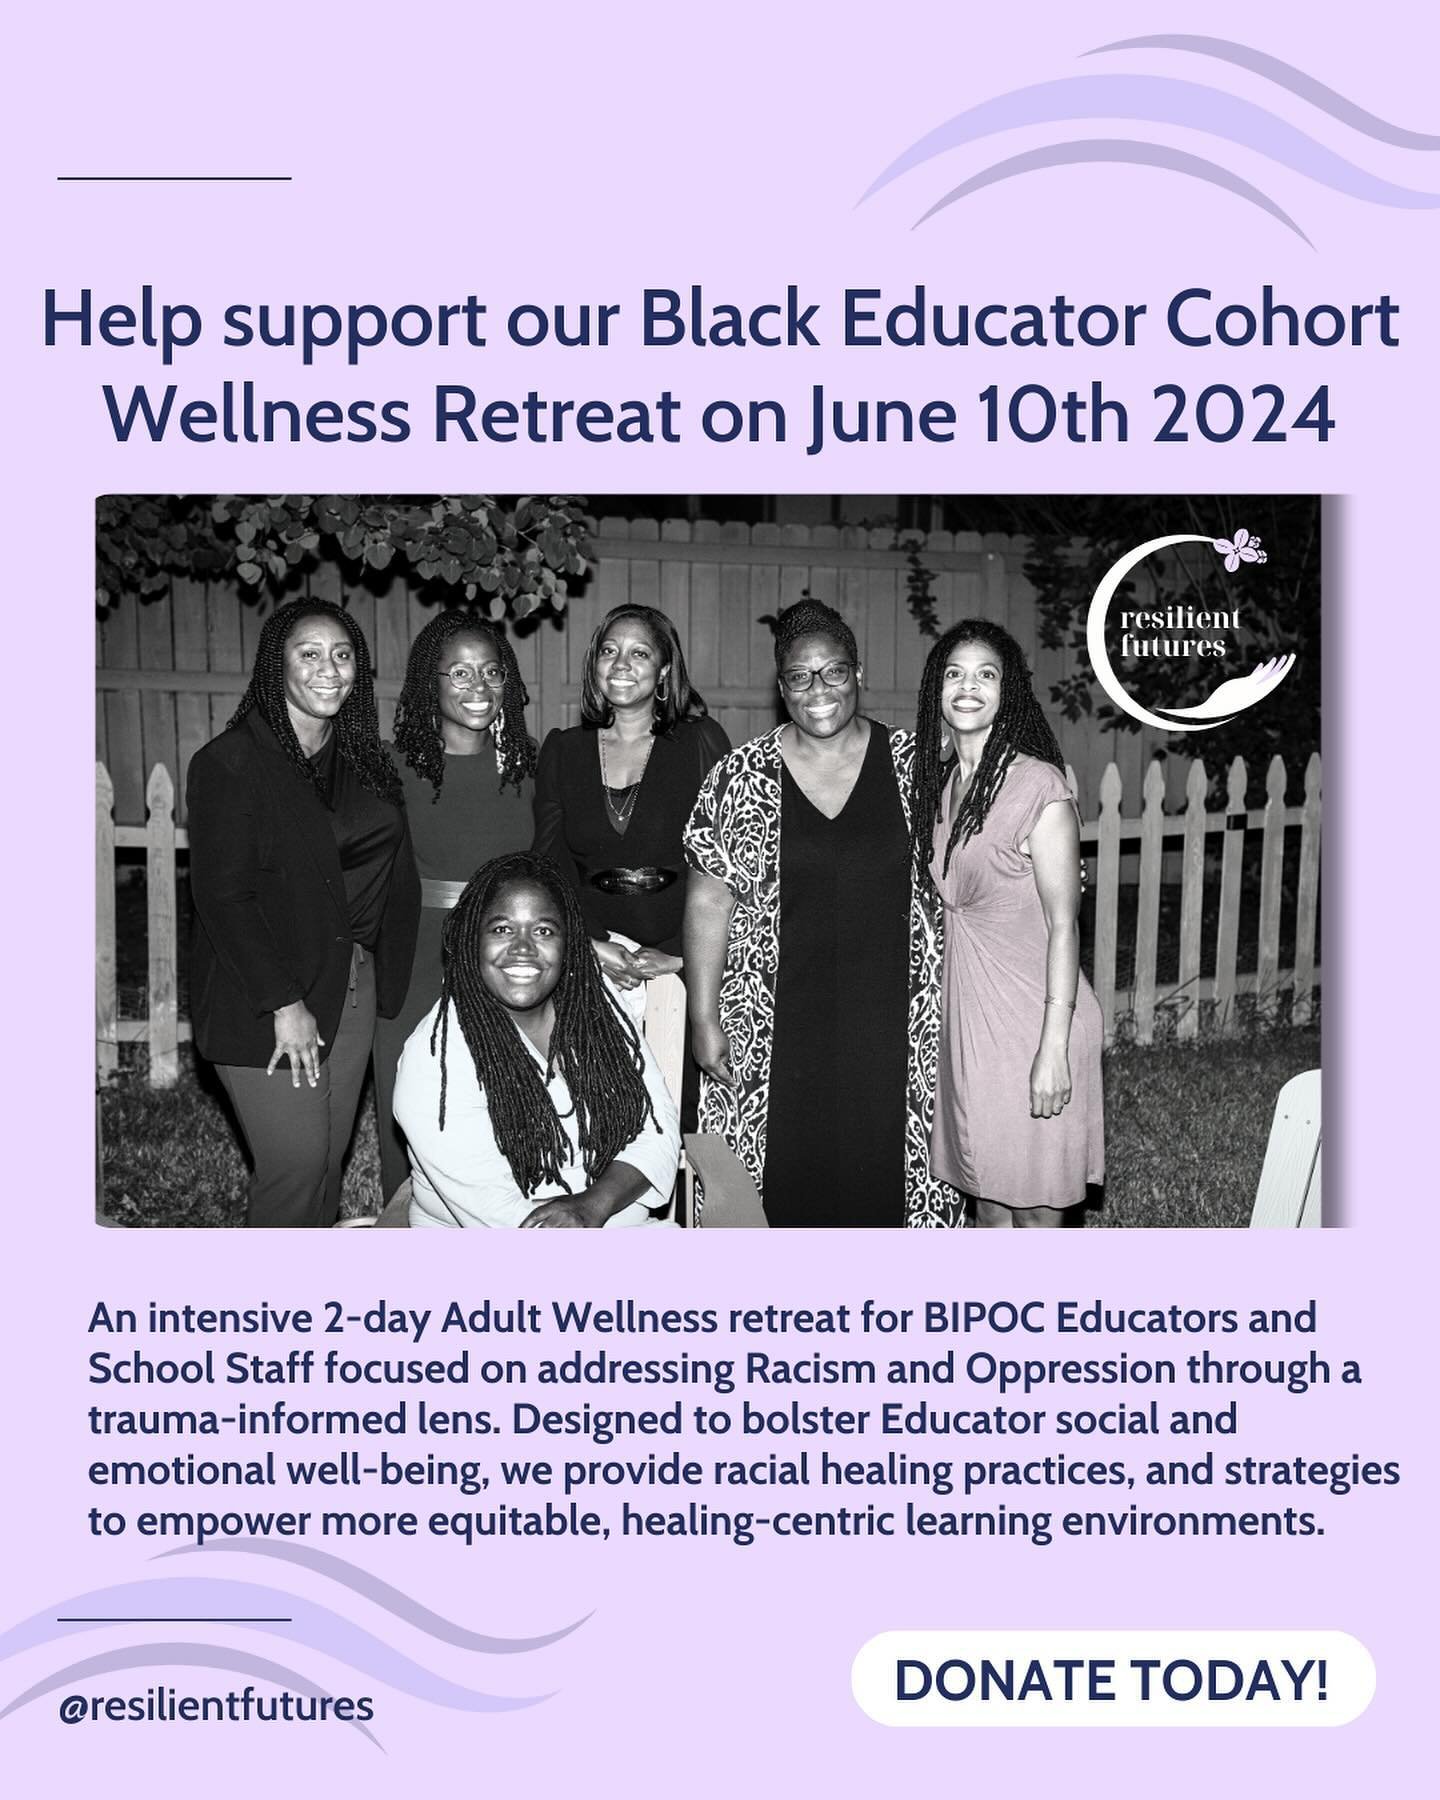 We need your help! We are looking for donations and supplies to support our annual Black Educator Wellness Cohort Retreat, taking place June 10-12.
.
If you&rsquo;re interested in making a donation, donate directly or visit our Amazon wish list via l